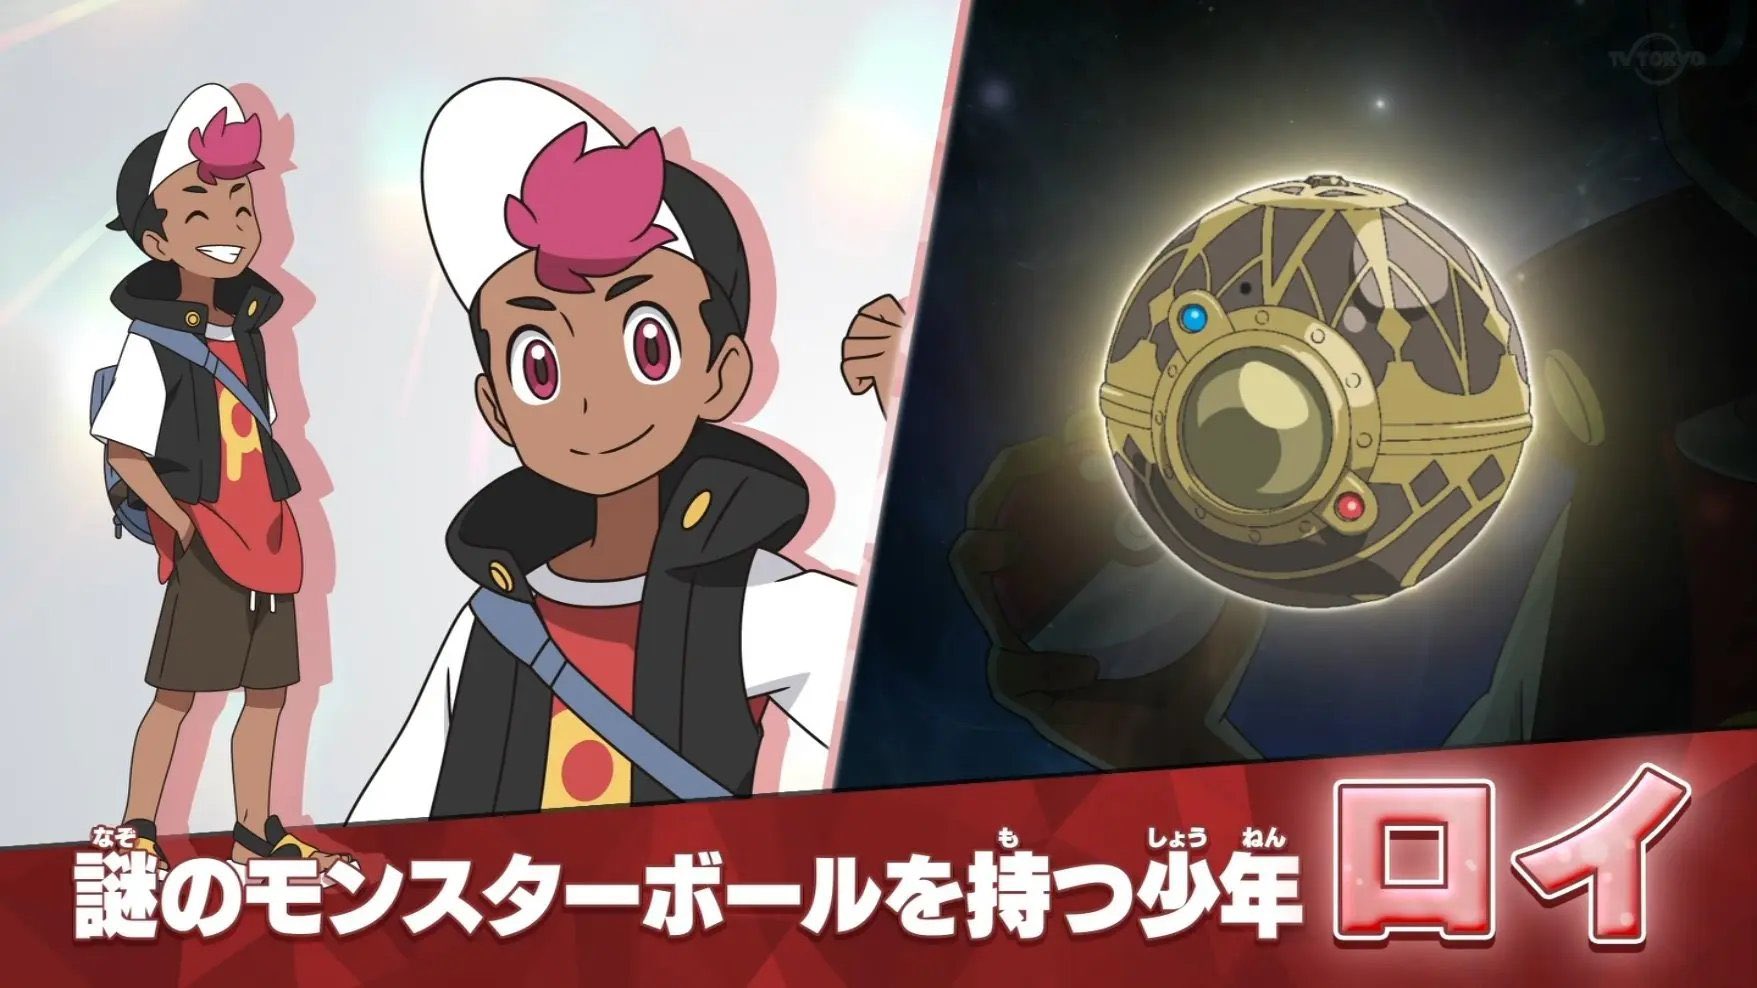 SoulSilverArt on X: 1 thing that kinda bugs me about the new #anipoke  series is that the big mystery Pokémon to start the series is a shiny  Rayquaza,instead of a totally new